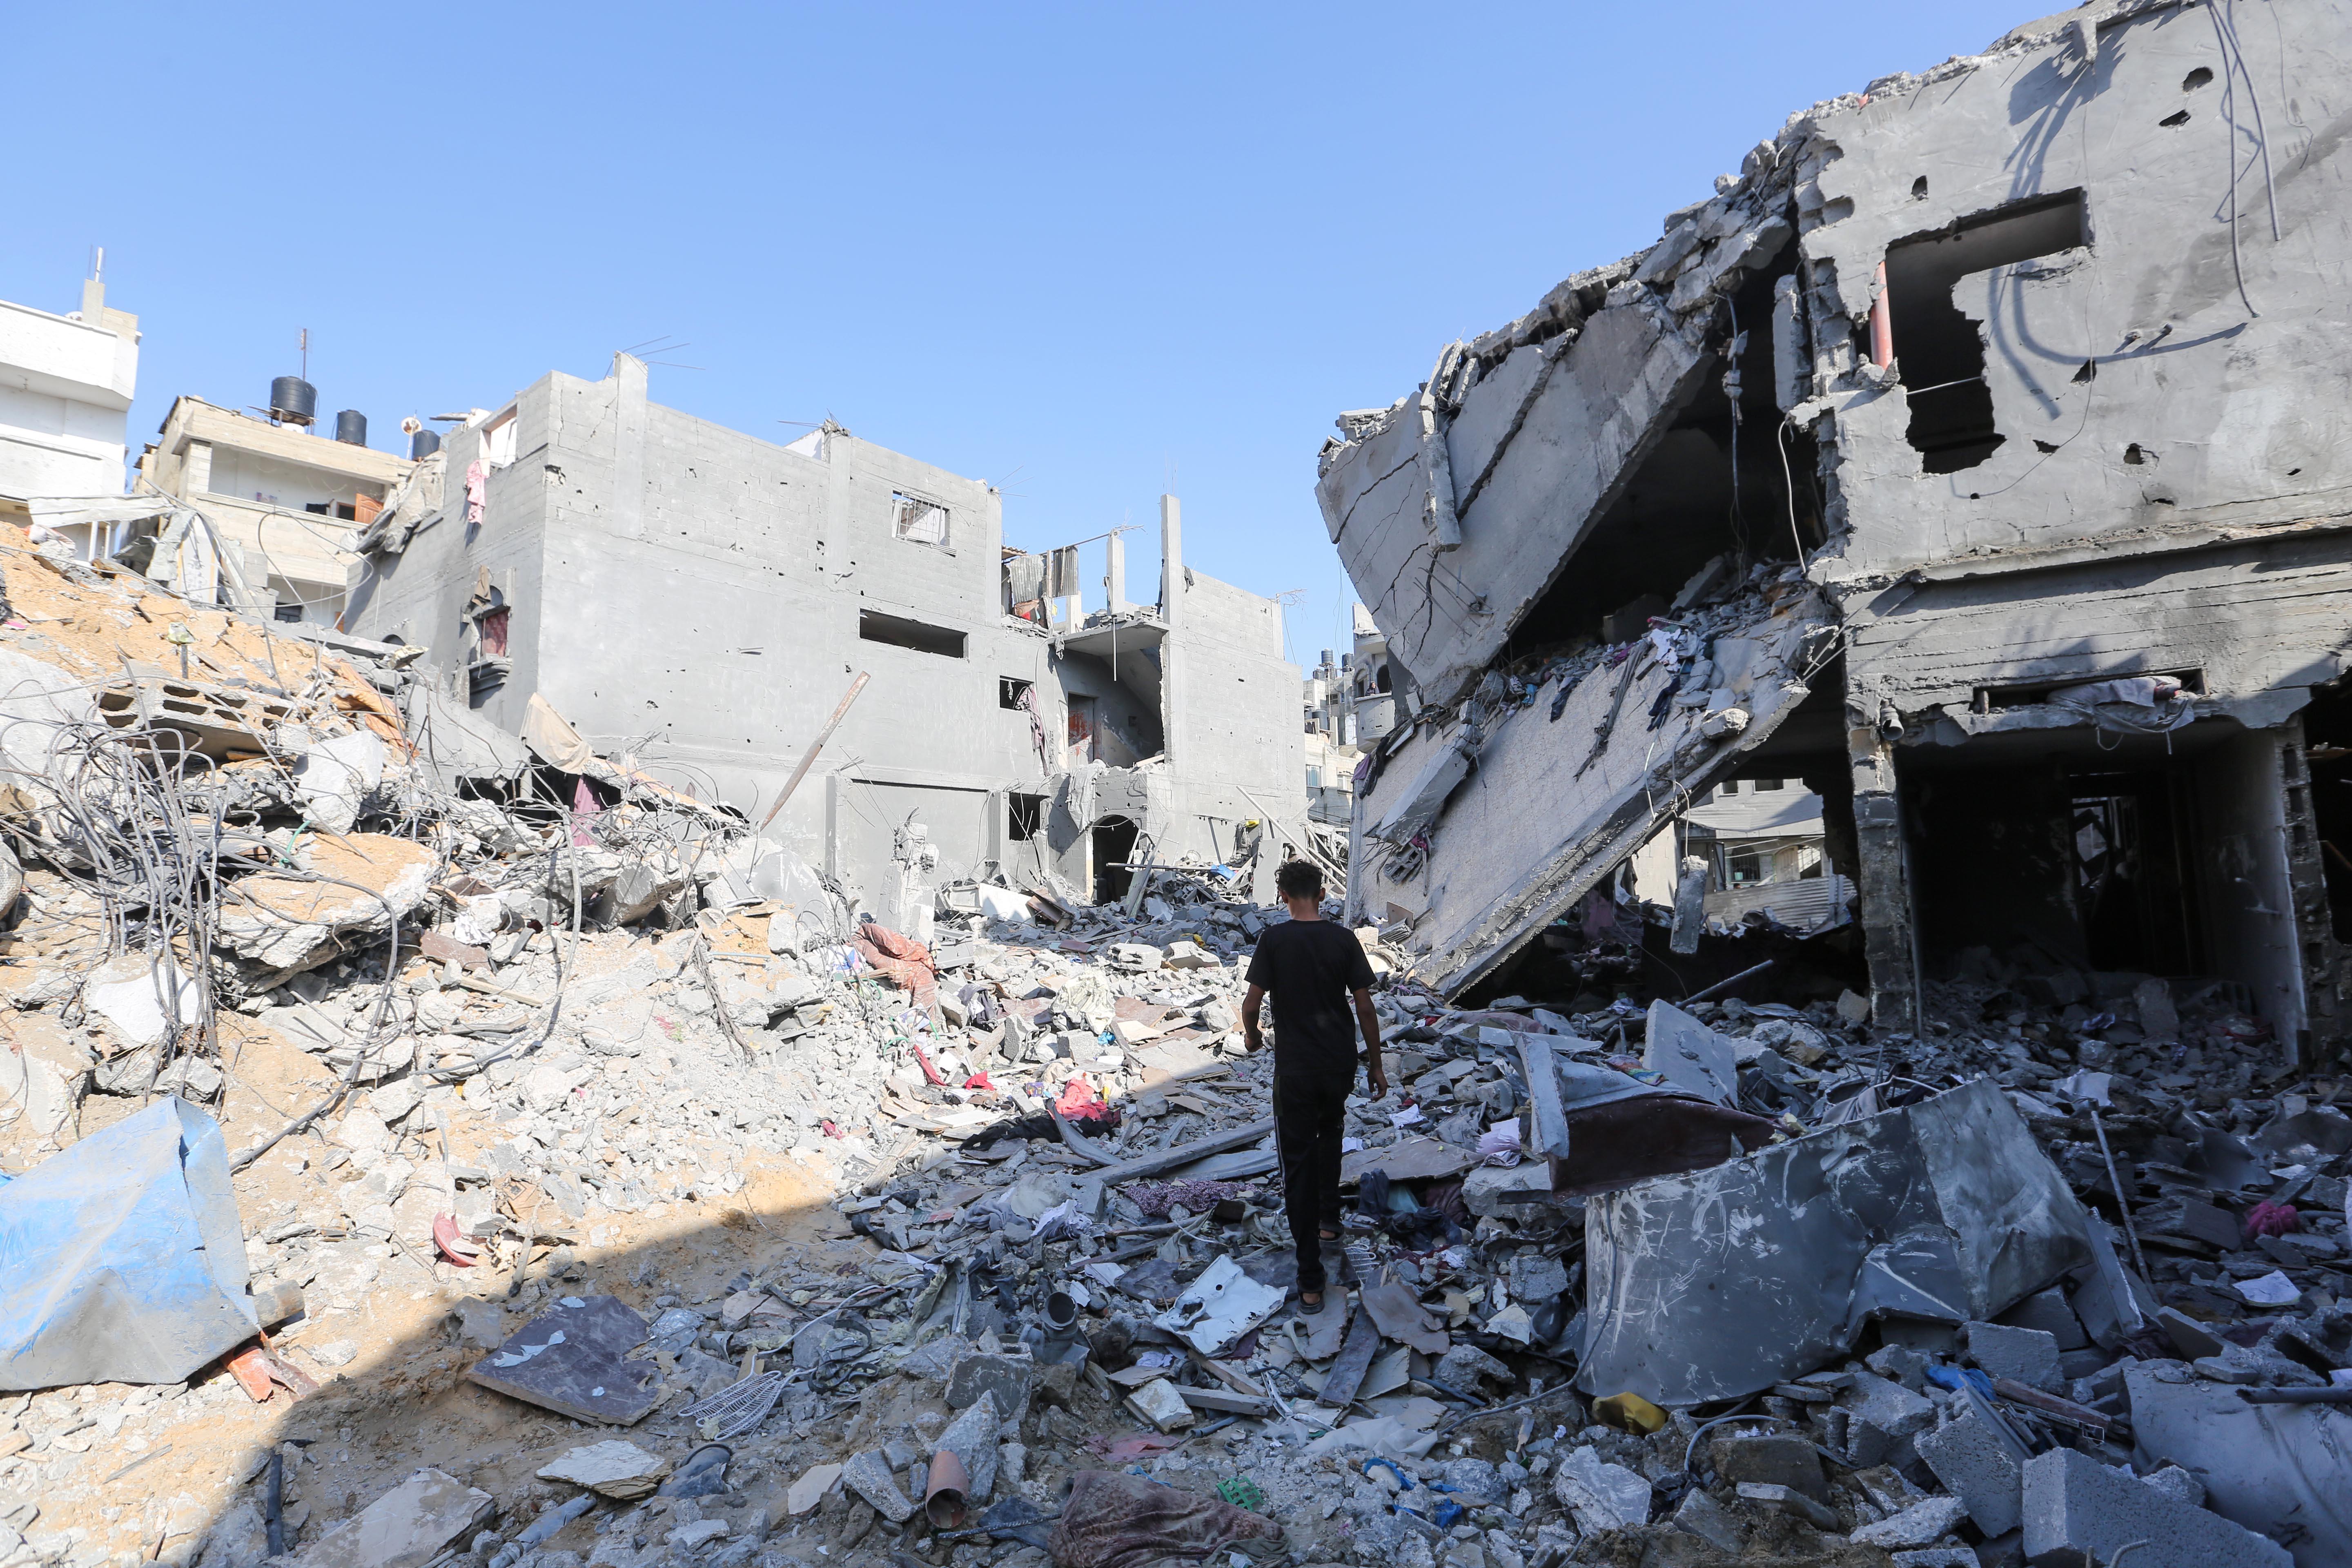 A person walks through the rubble between destroyed buildings.